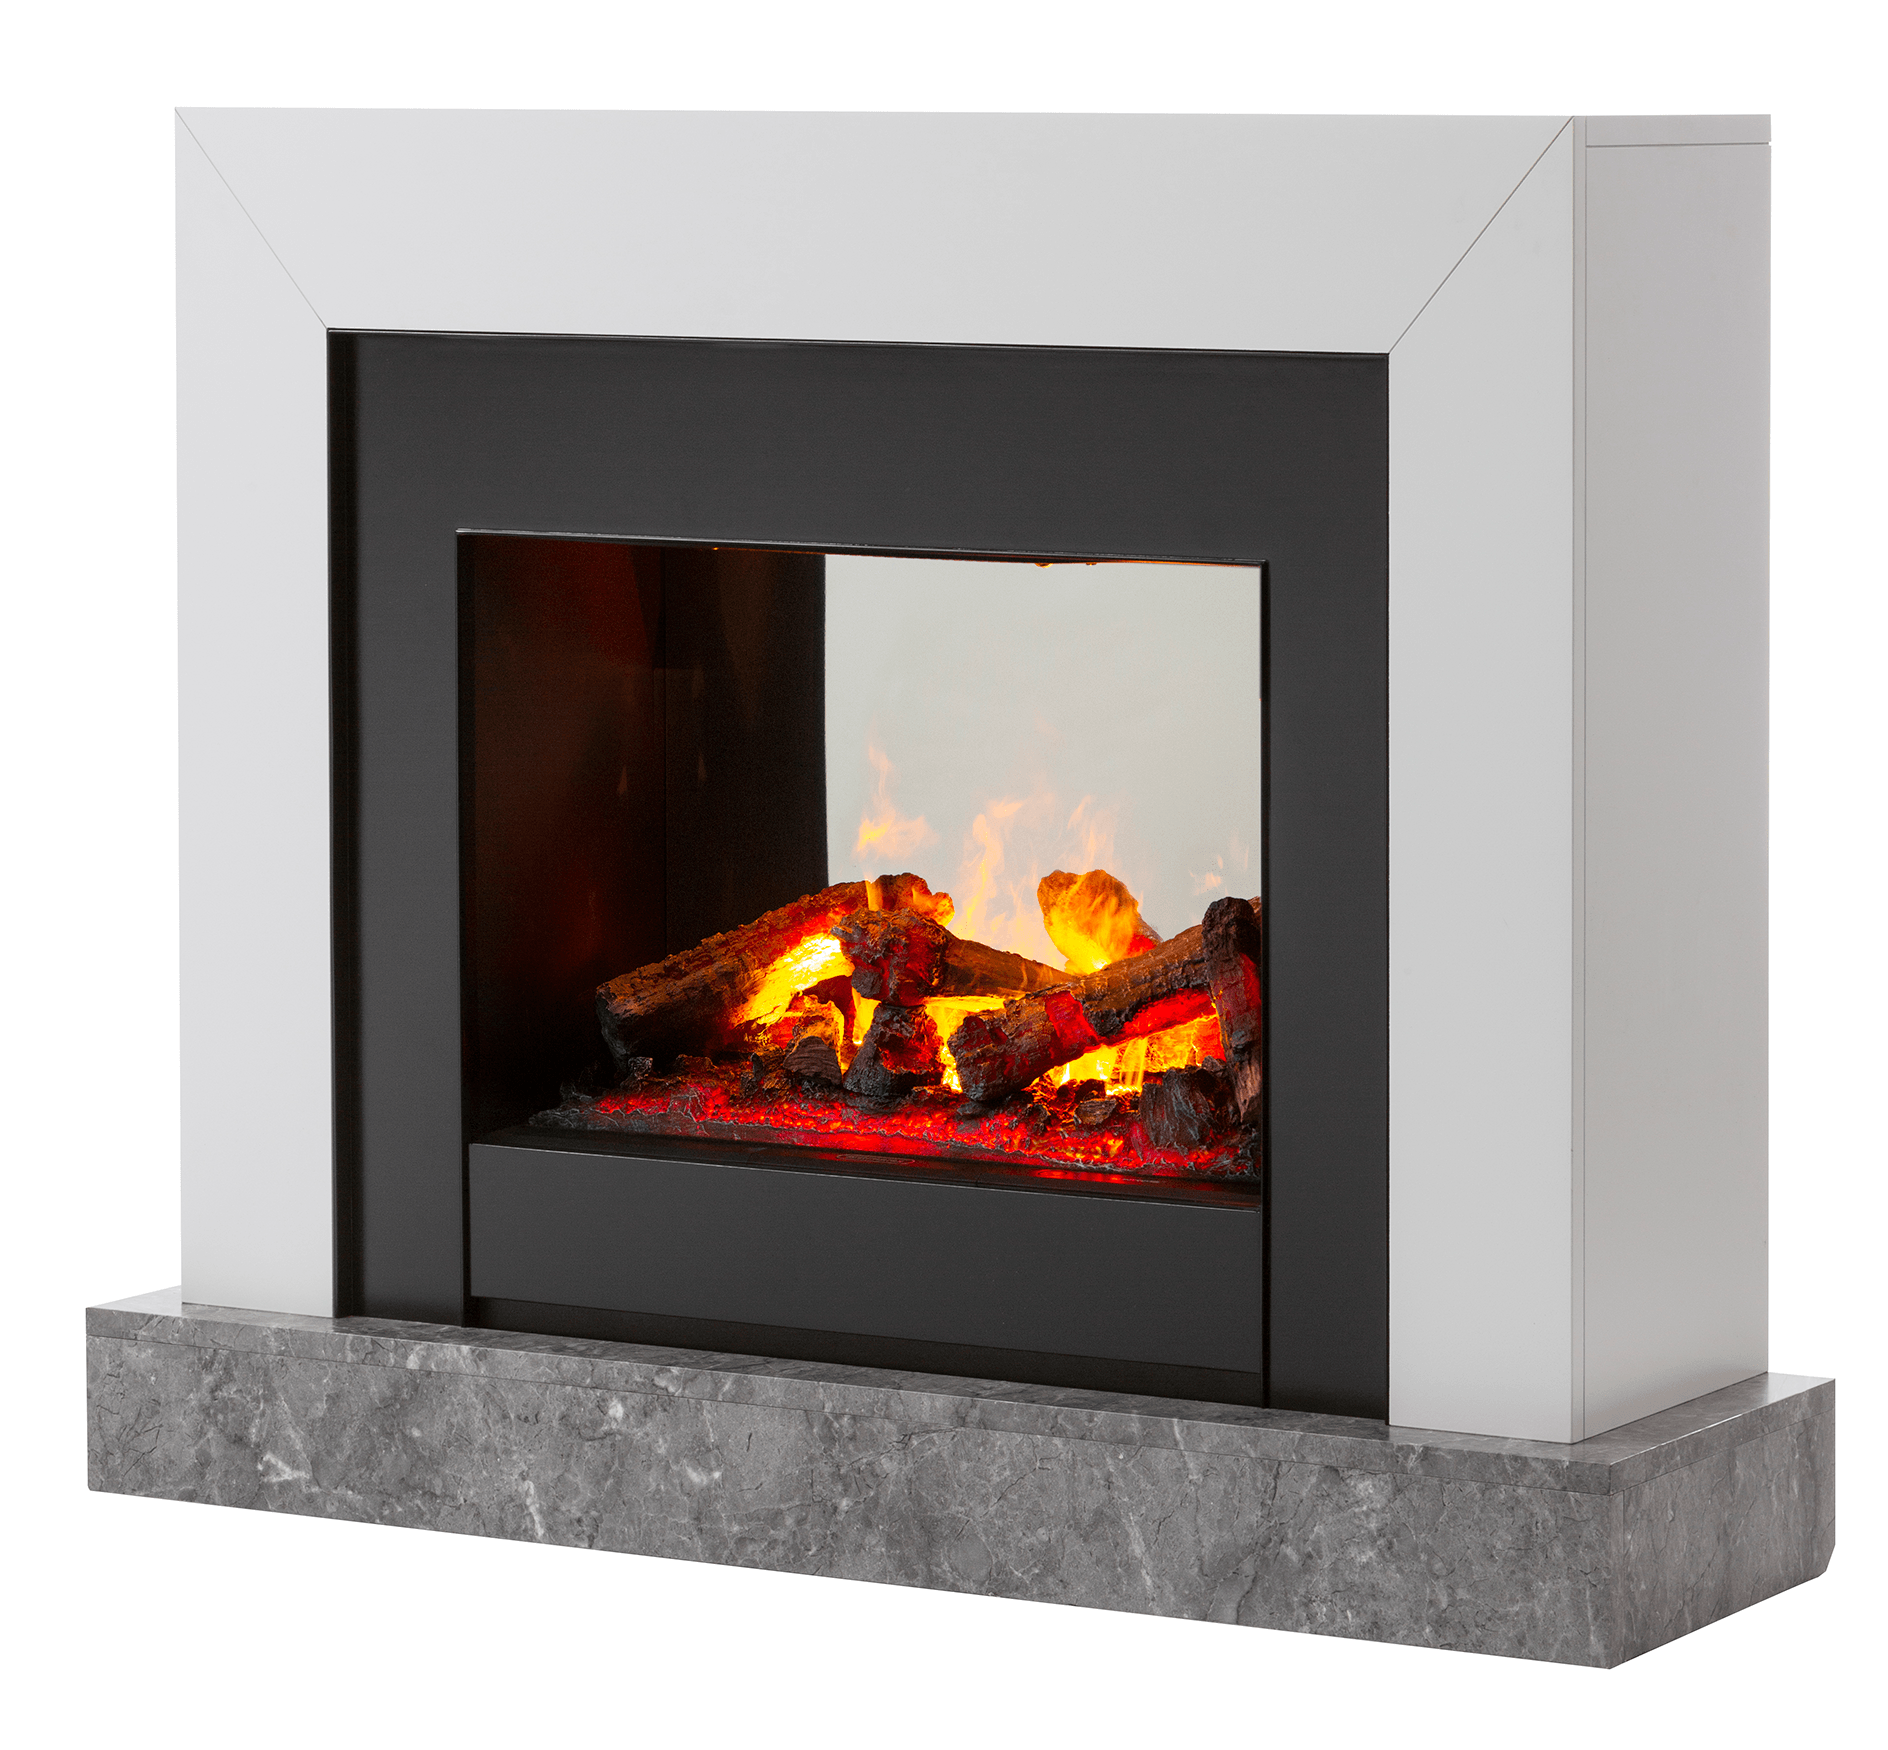 Dimplex 2Kw Ravel Optimyst 3D Electric Fire with Satin White & Black Finish with Concrete Base Effect